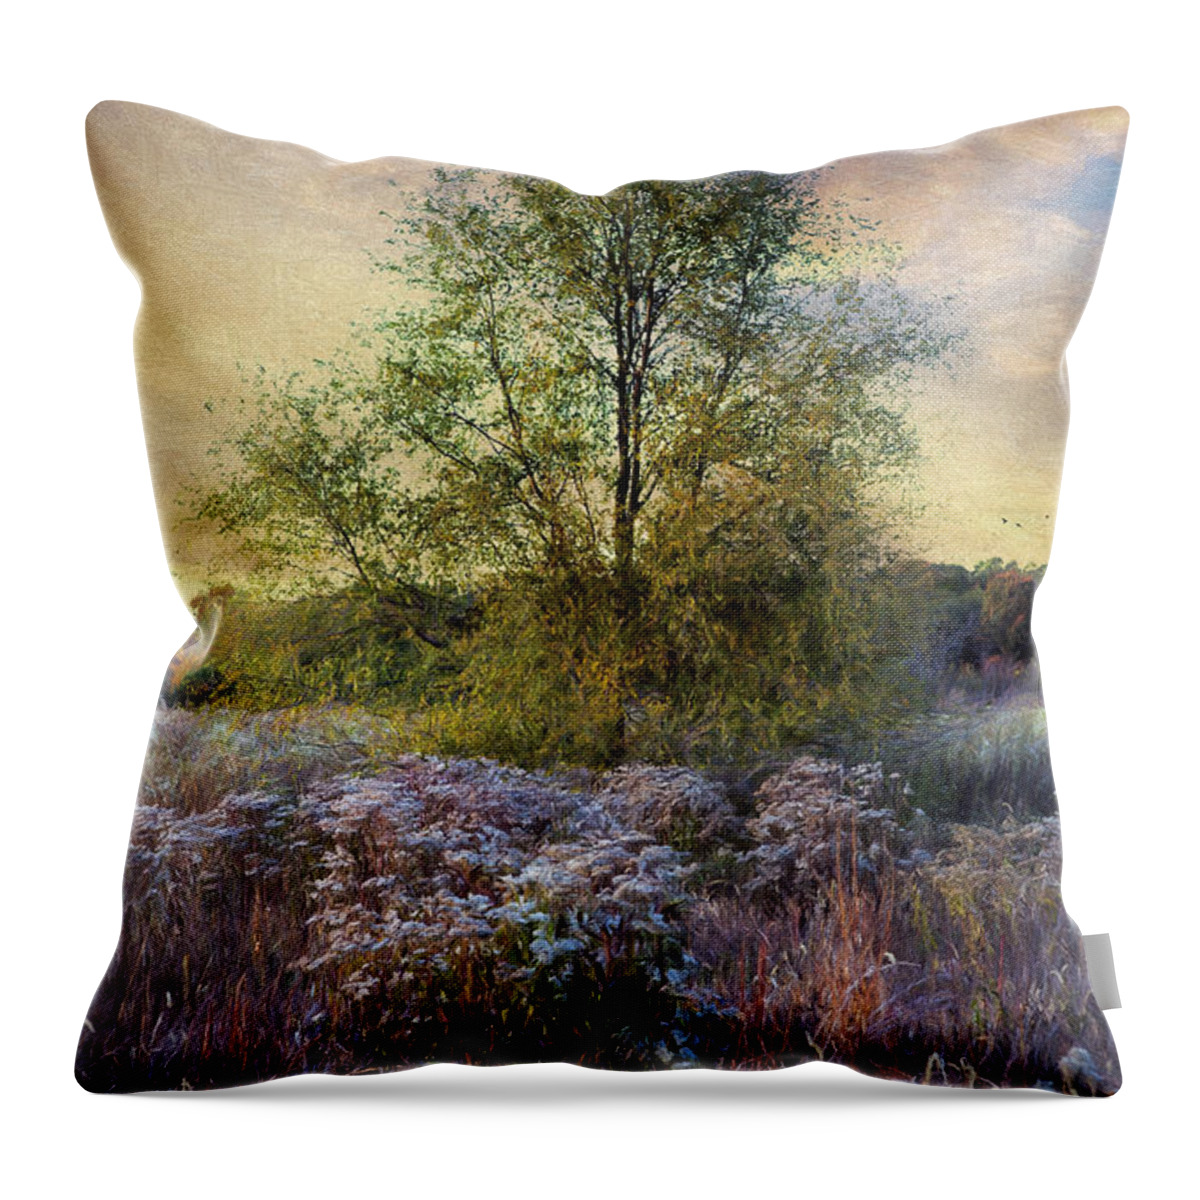 Tree Throw Pillow featuring the photograph Standing Alone by John Rivera